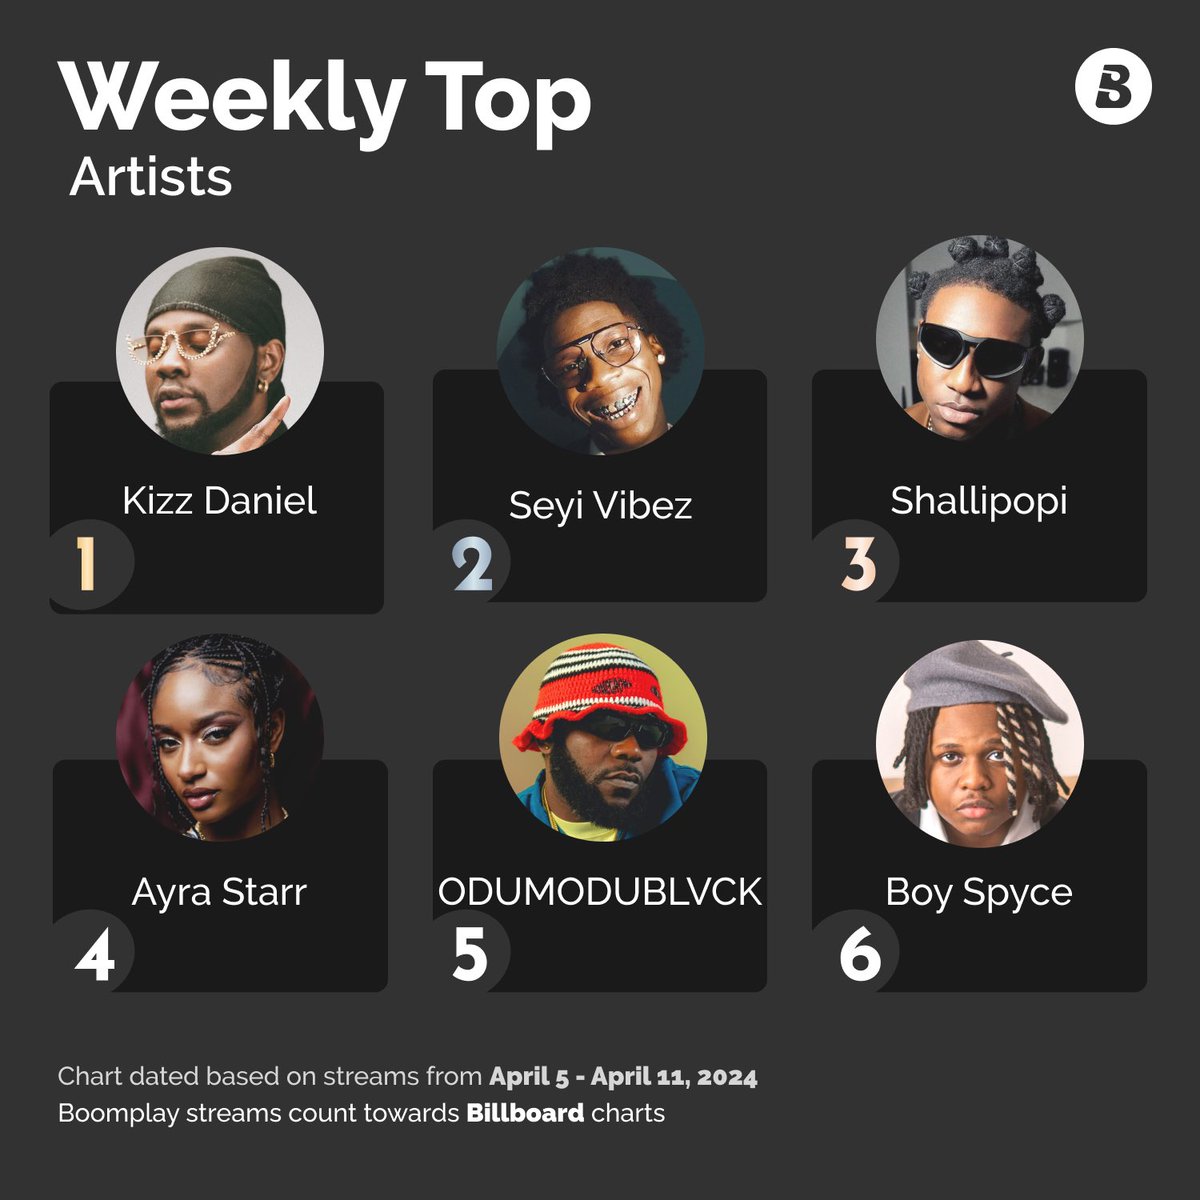 Let us know your faves on this list! 🤩👇🏾 Here are the top trending artists on BoomplayNG for the week! 🔥 ⭐️ @KizzDaniel ⭐️ @seyi_vibez ⭐️ @plutomaniapopi ⭐ @ayrastarr ⭐️ @Odumodublvck_ ⭐️ @BoySpyce #Boomplay